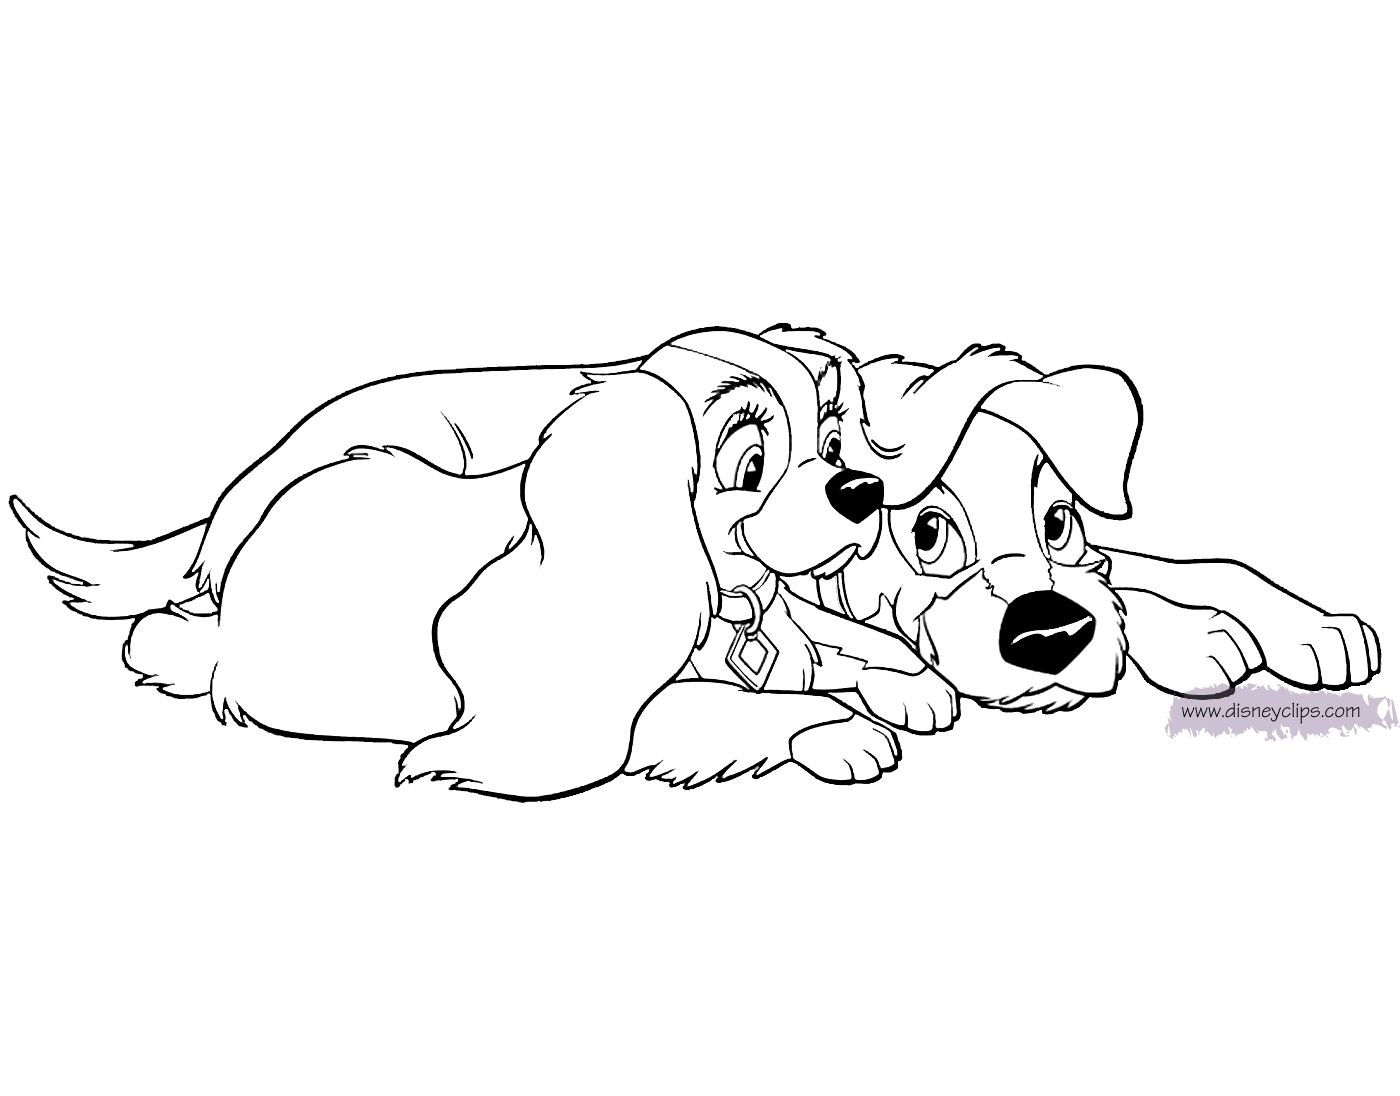 Disney Lady and the Tramp Printable Coloring Pages | Disney Coloring Book